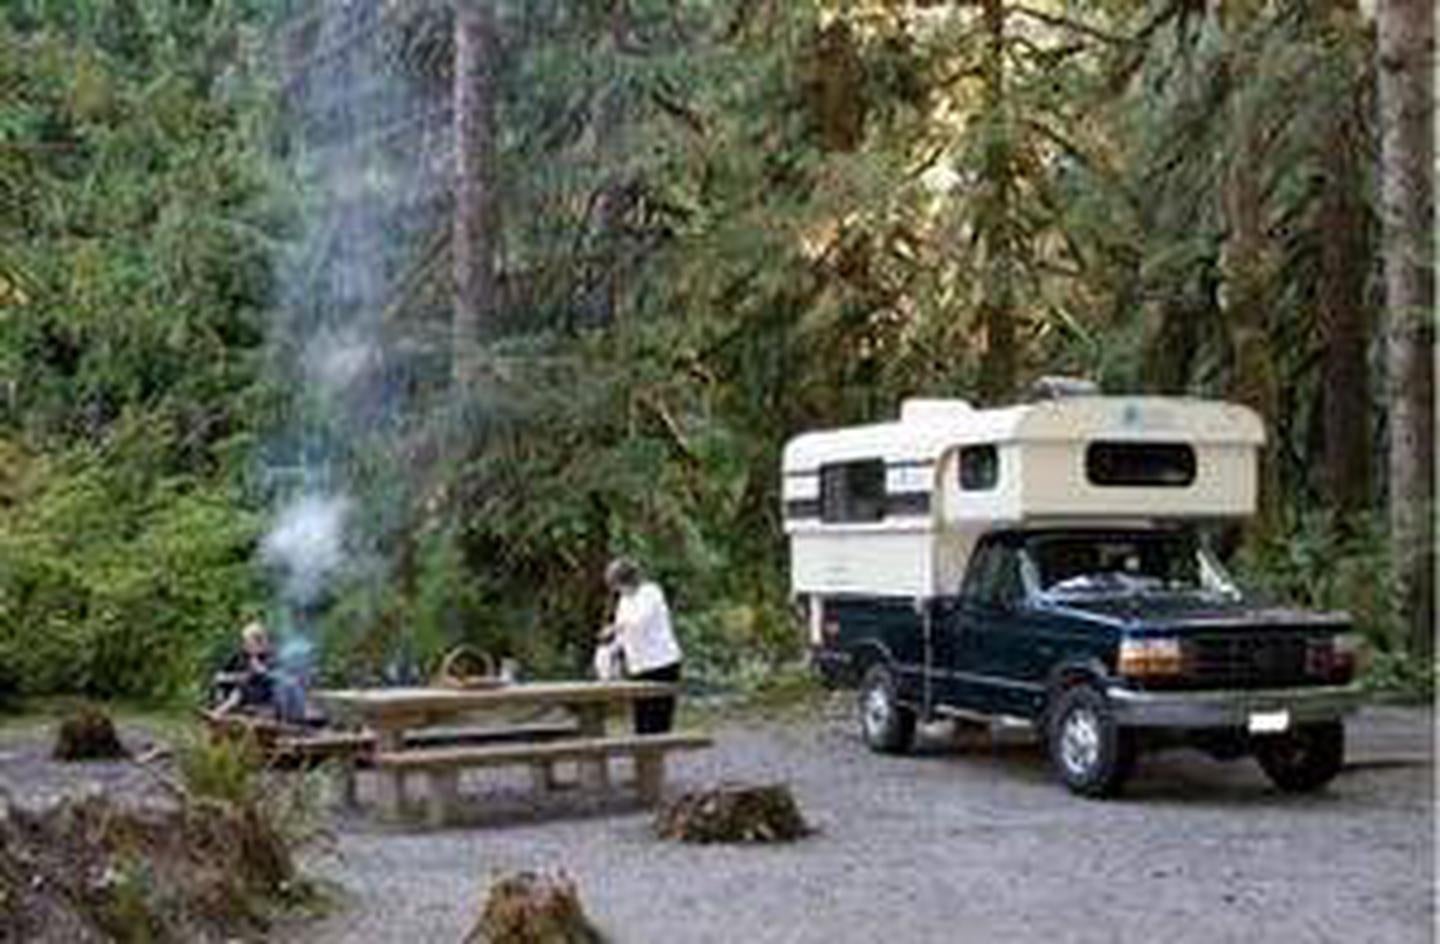 Camper submitted image from Turlo Campground - 1